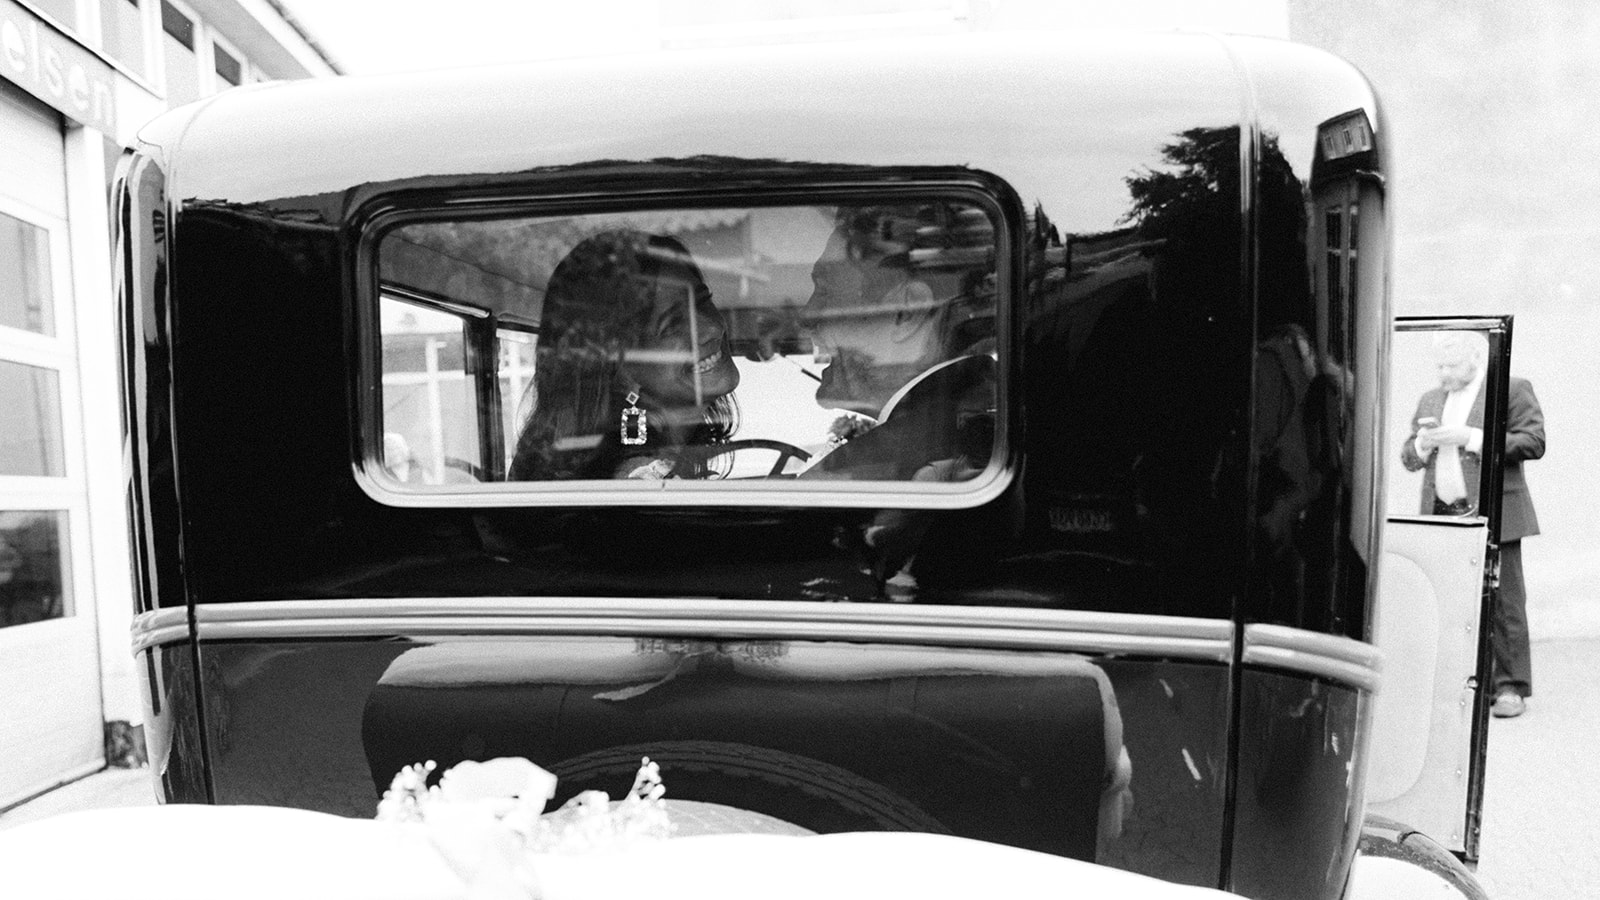 couple sitting at the back of the vintage car and smiling, kissing